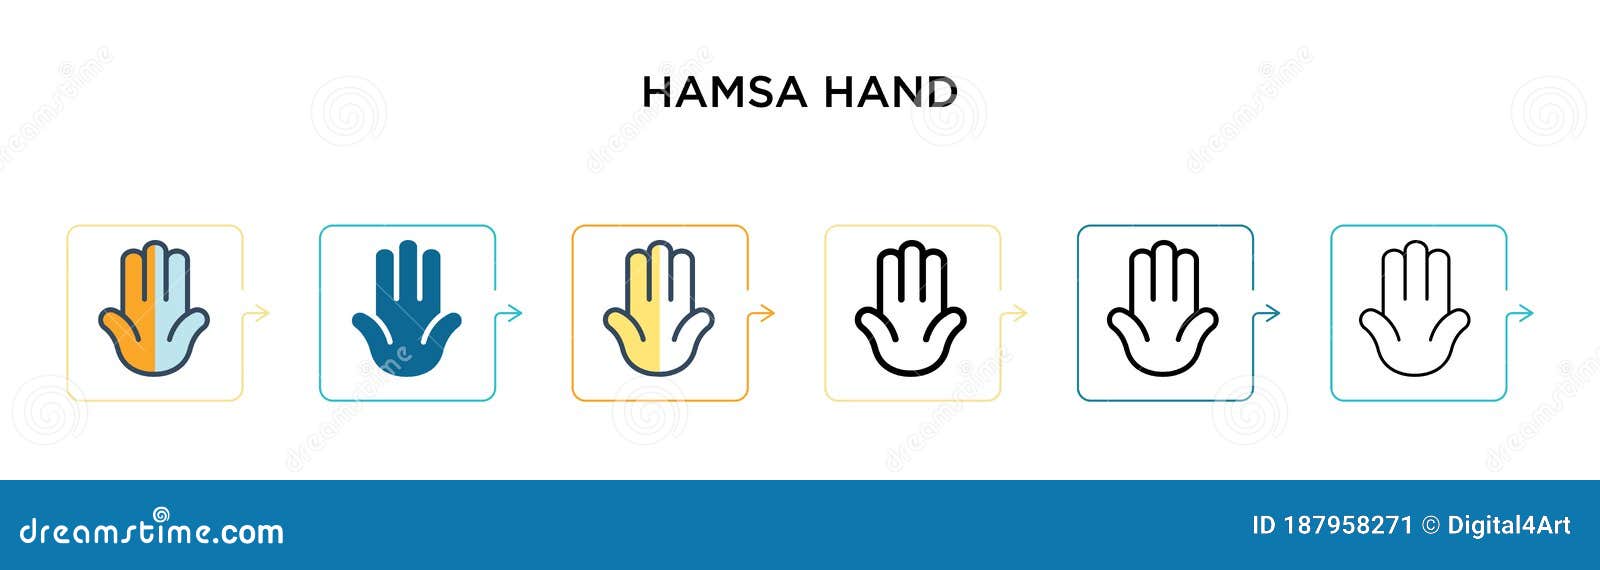 Hamsa Hand Vector Icon in 6 Different Modern Styles. Black, Two Colored ...